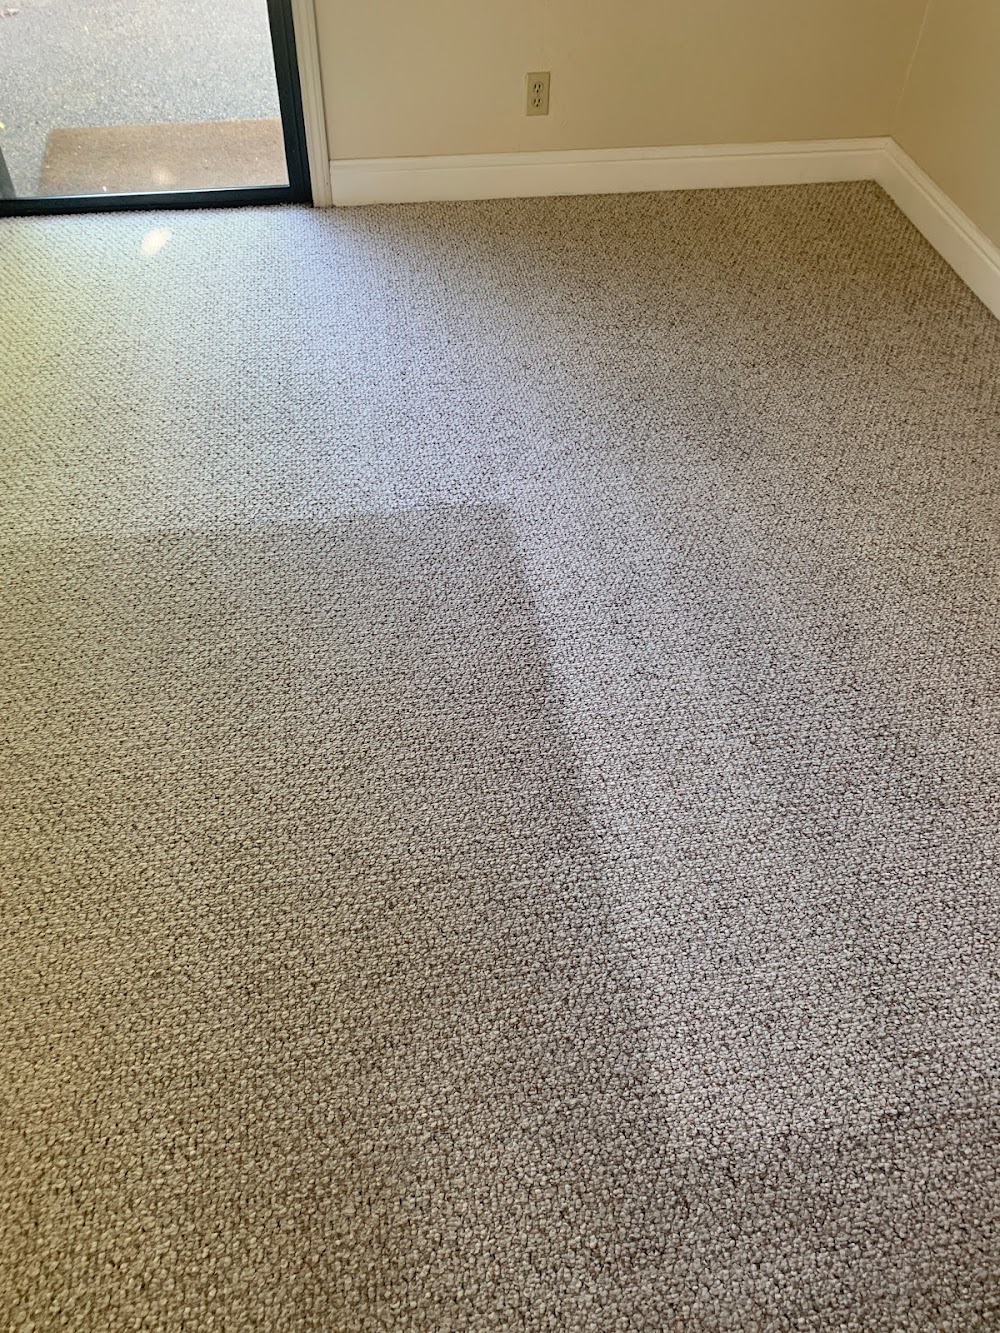 Cleaning Solutions Carpet & Tile Cleaning Roseville CA